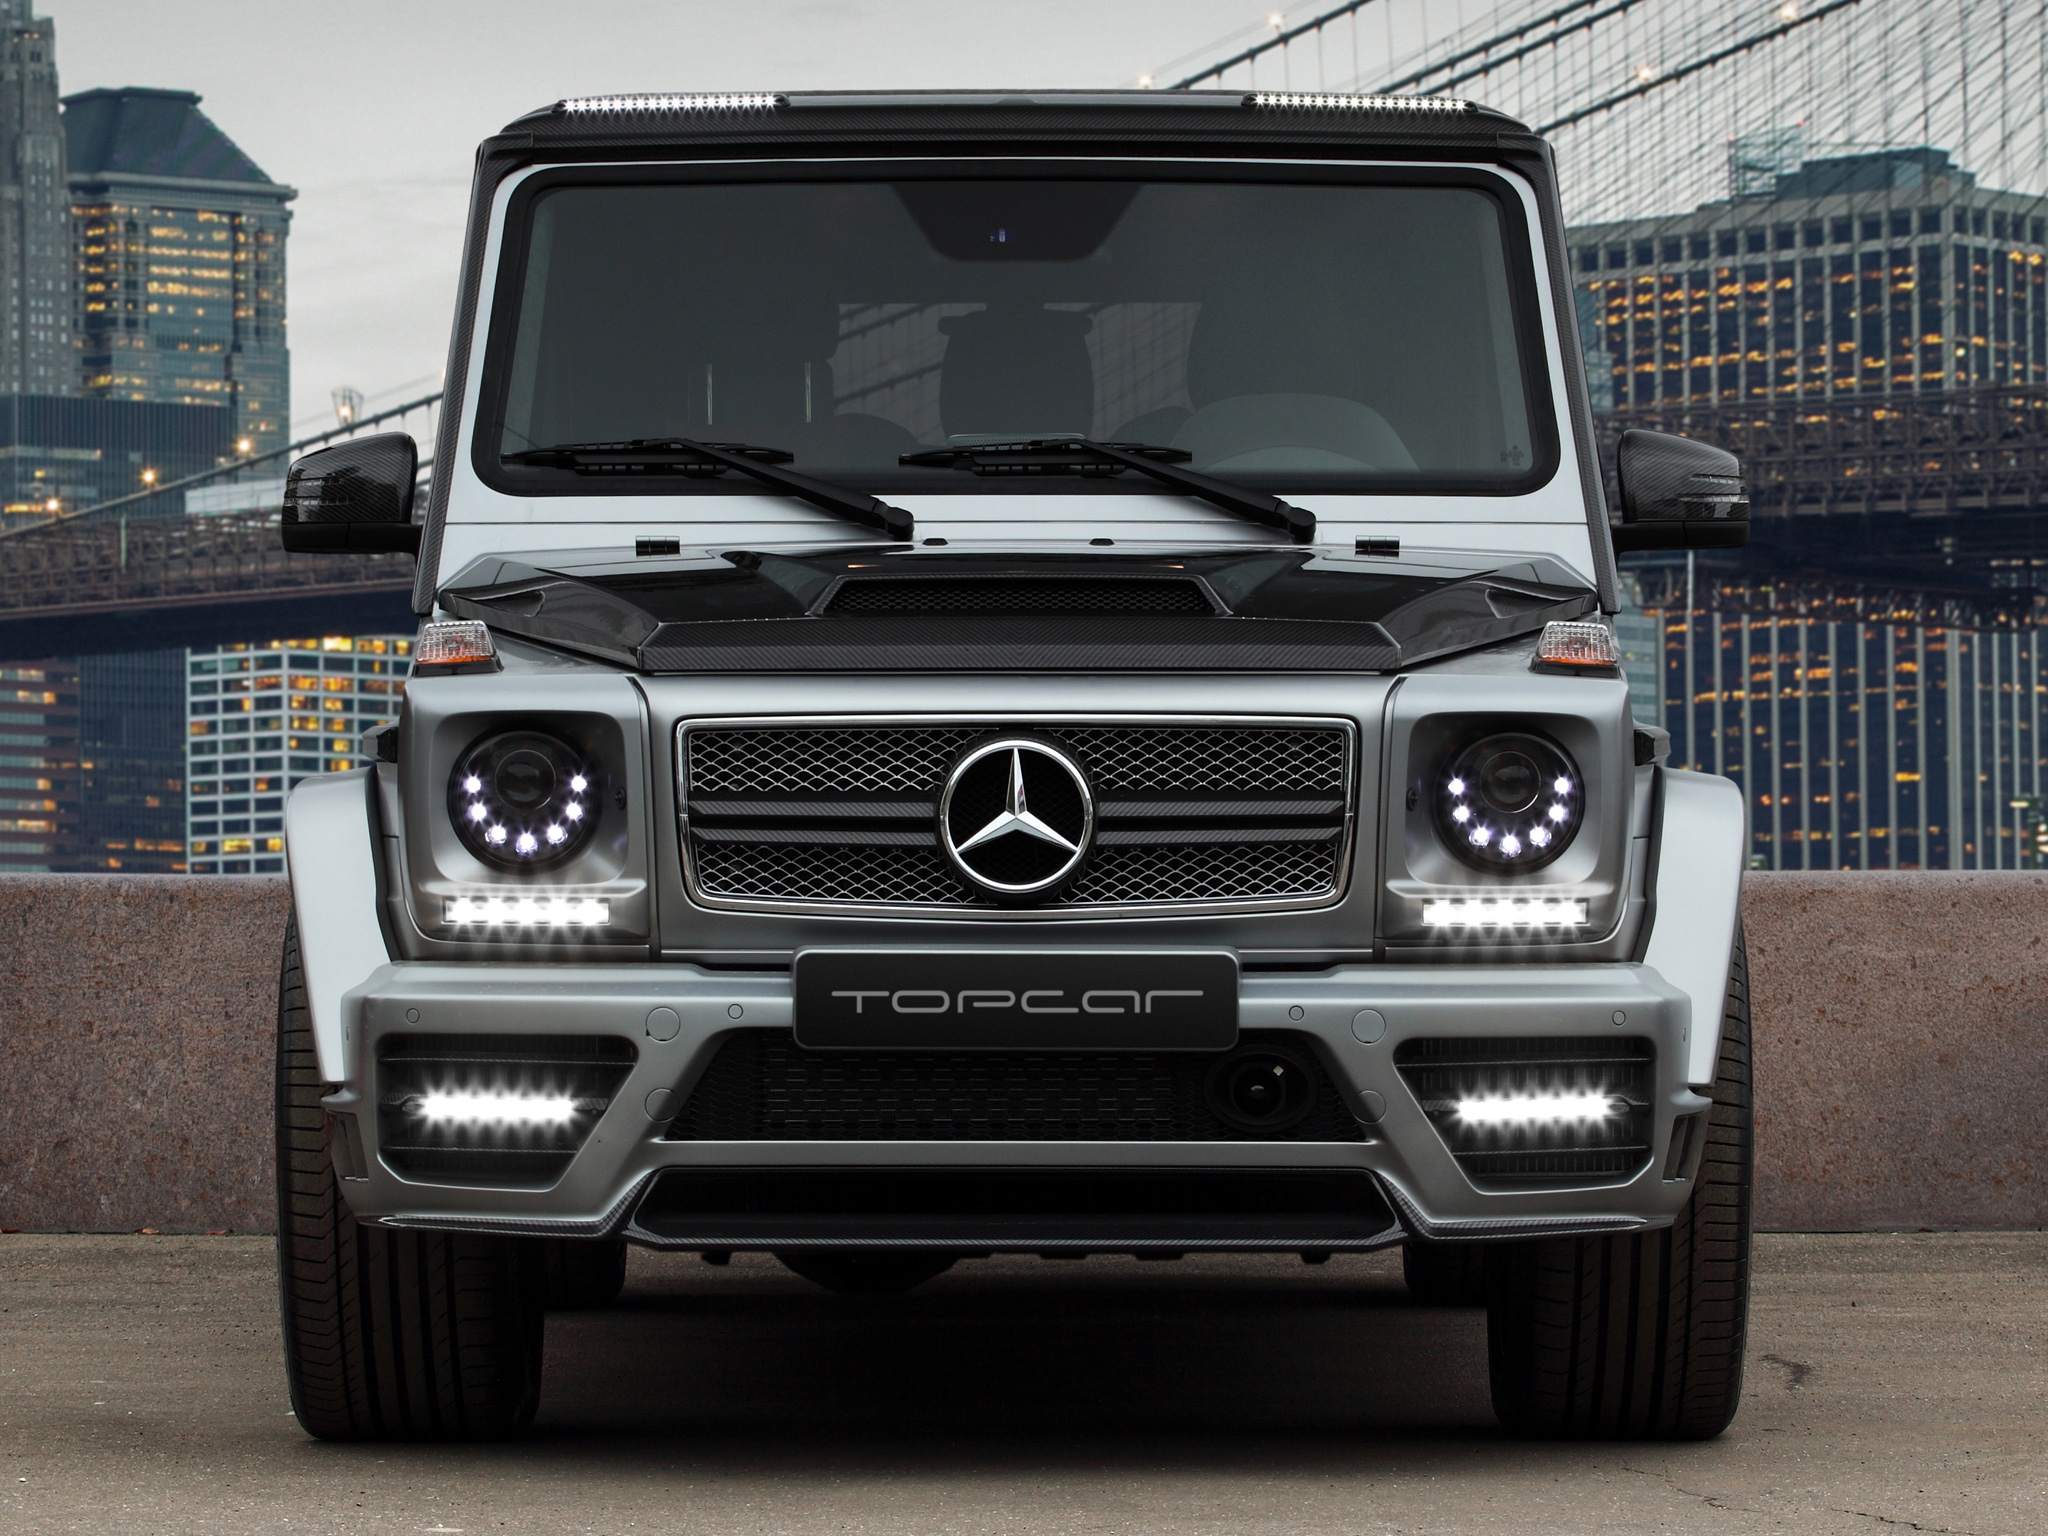 Mansory Mercedes Benz G65 AMG (W463) Suv Tuning H Wallpaper